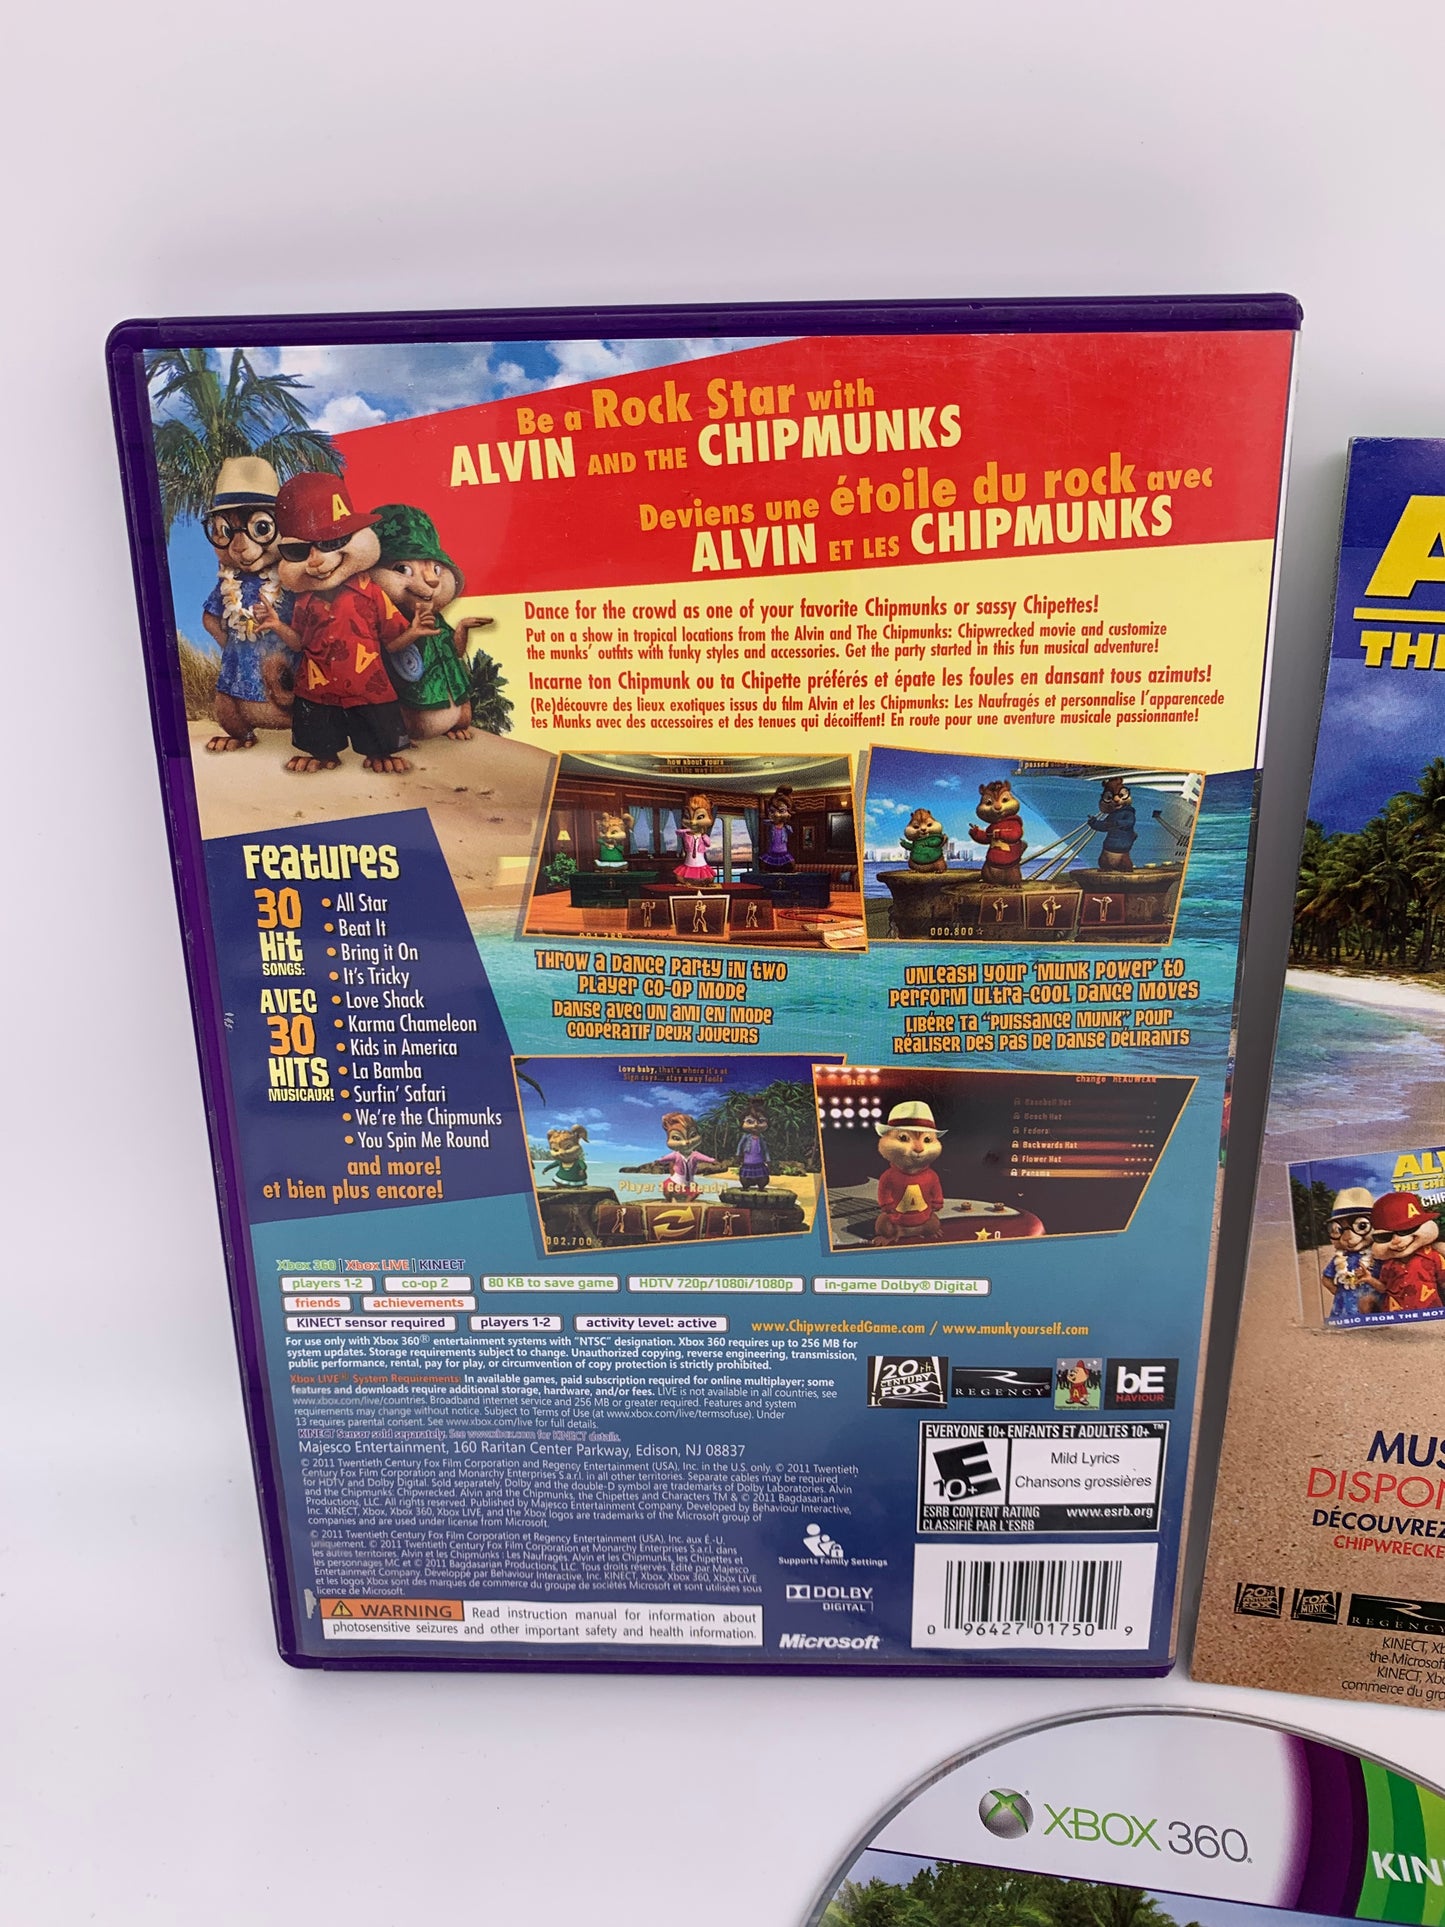 MiCROSOFT XBOX 360 | ALViN AND THE CHiPMUNKS CHiPWRECKED